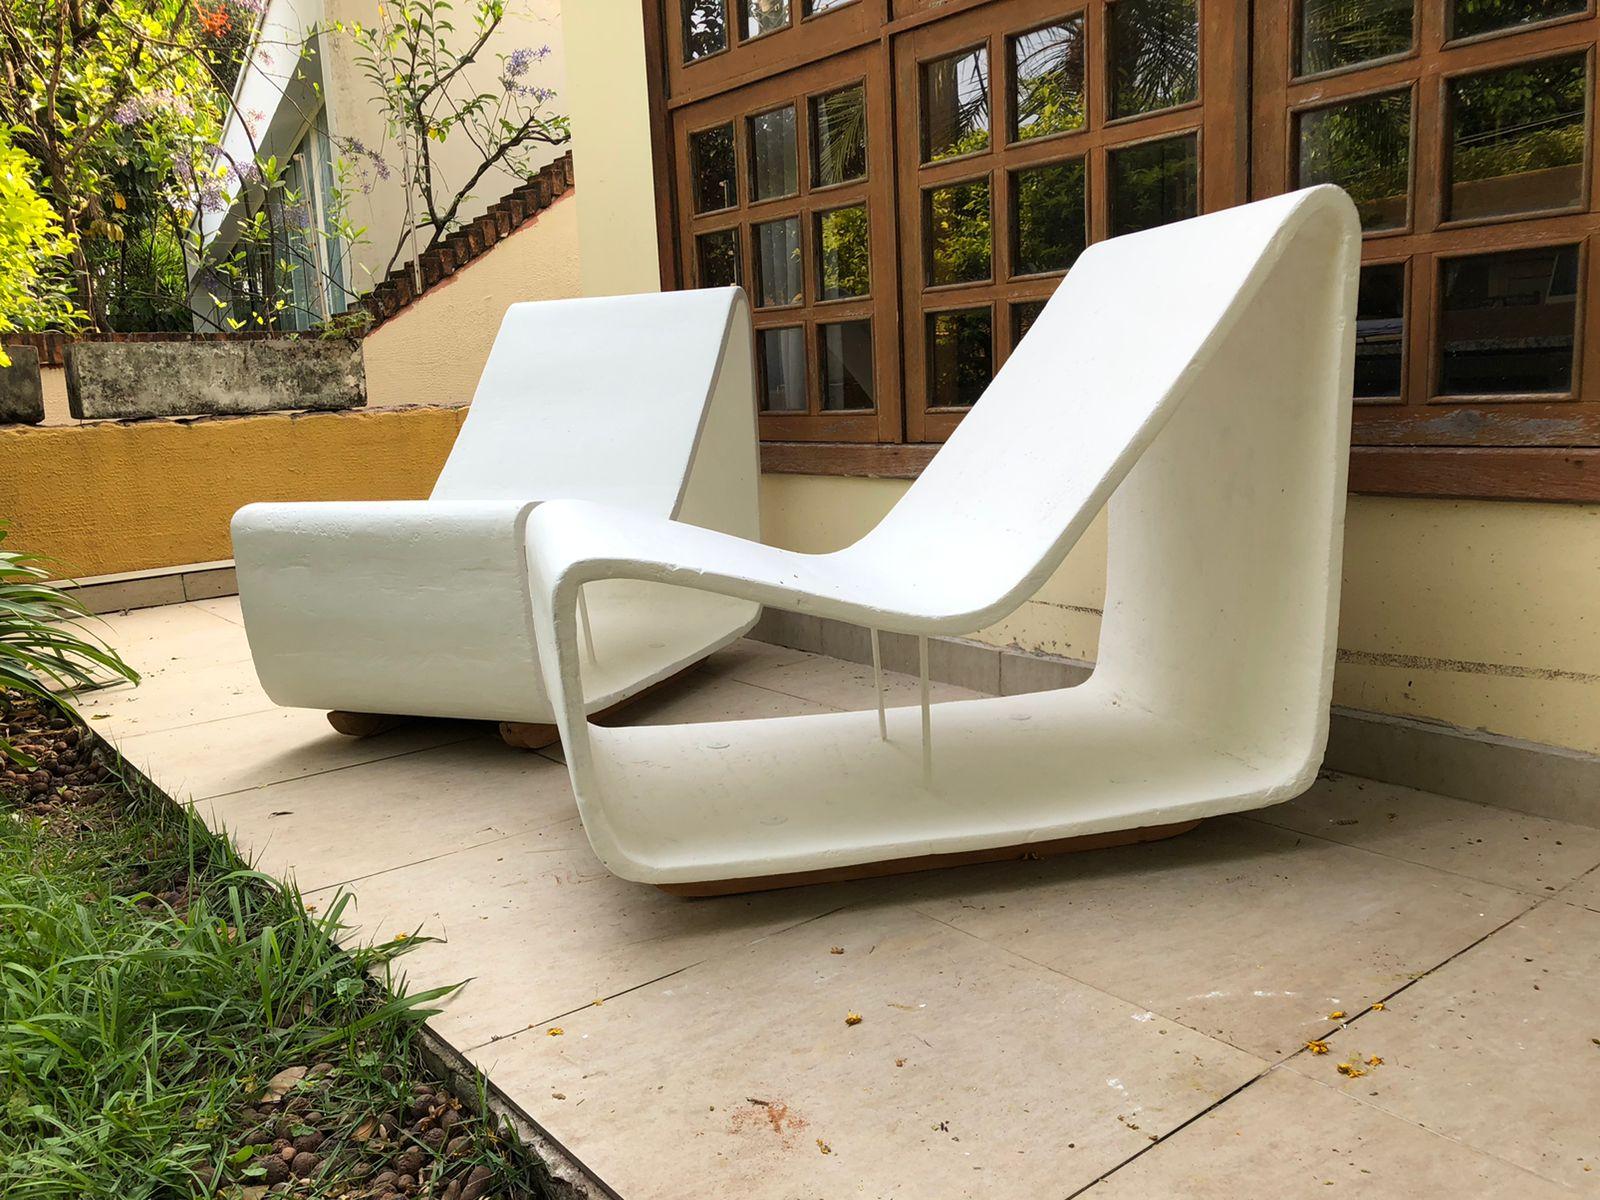 Pair of concrete chair designed & signed by Willy Guhl for Eternit. The chairs are a bigger version of the classic Loop Chair and keeps the loop shape characteristics, featuring a single volume of seats and backs. 
The chairs are suitable for